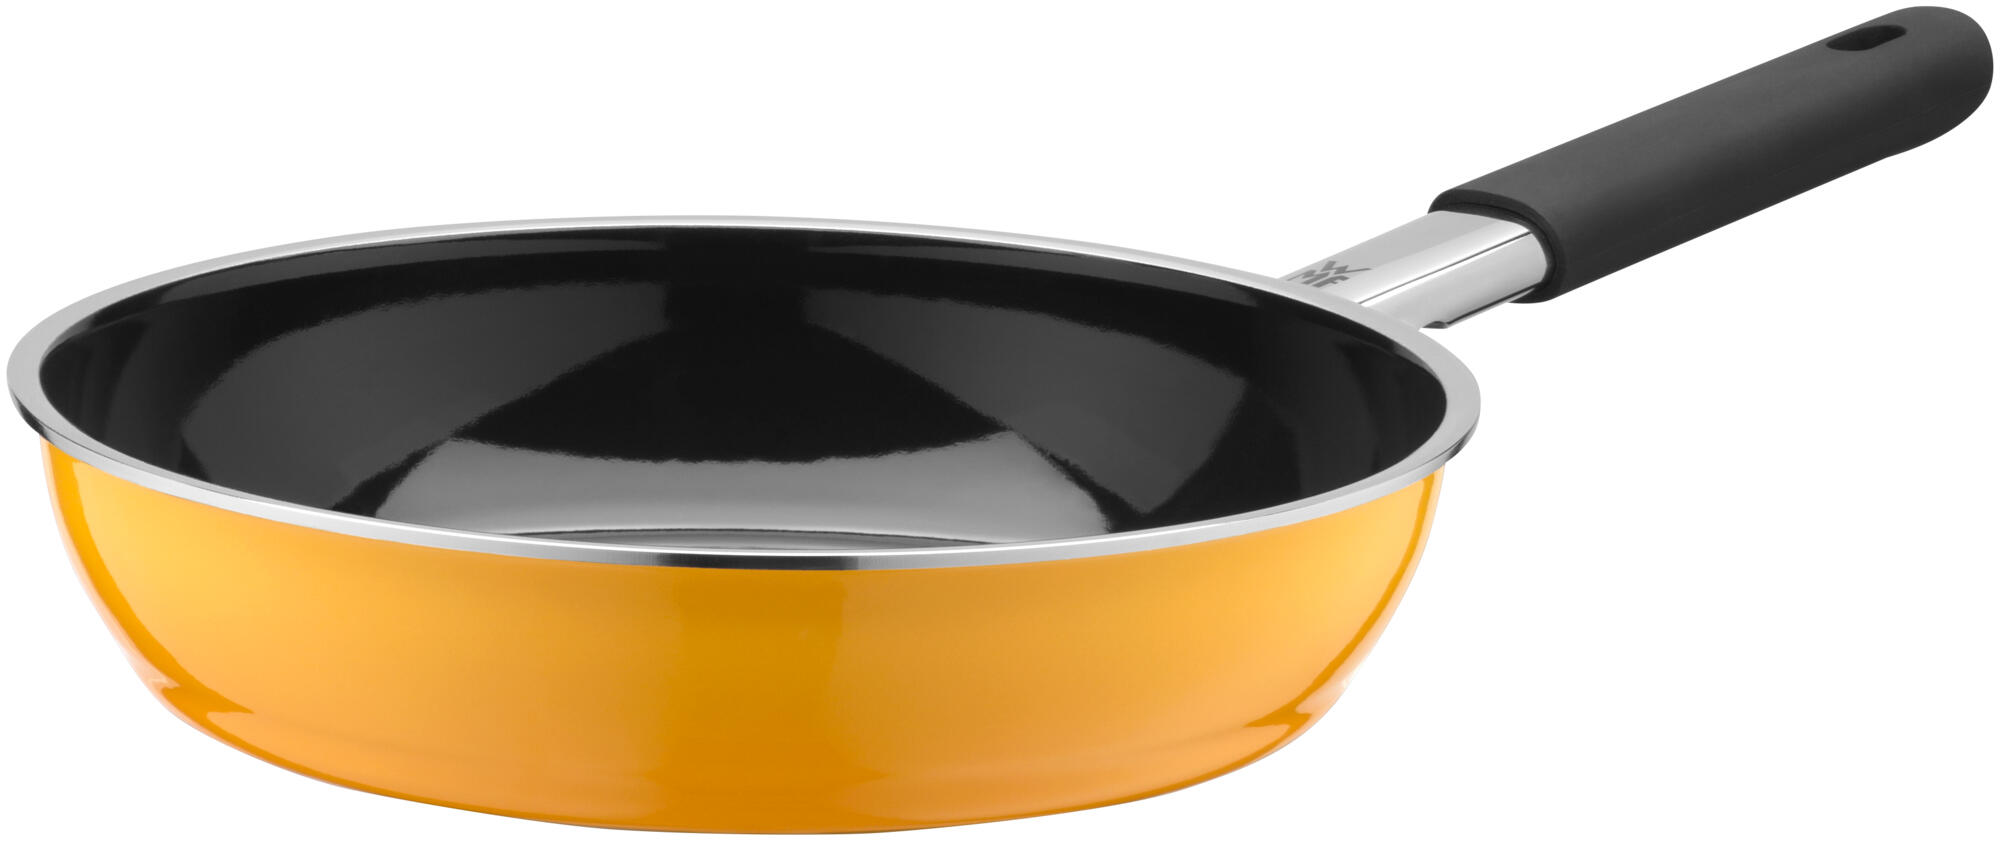 WMF Fusiontec Mineral Frypan 24cm Yellow